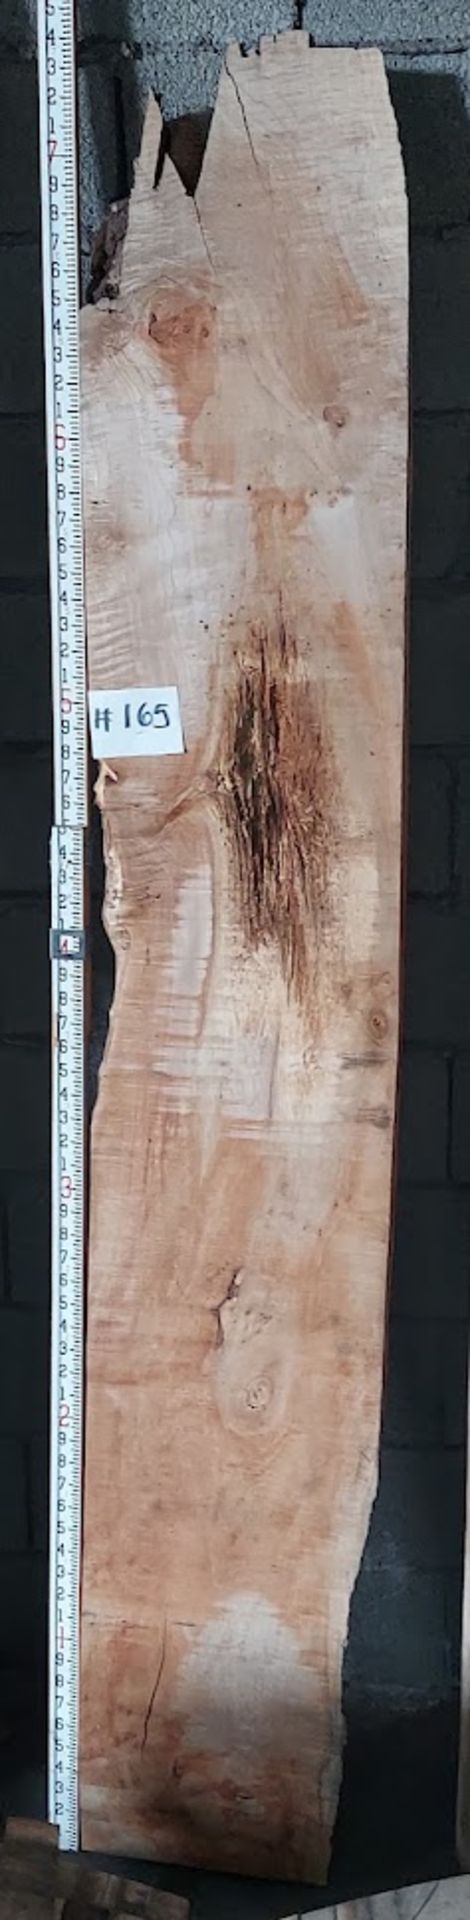 Maple Hardwood Lumber Slab, Size is approx. 89" x 13" - 15" x 2-5/8" Thick, Curly